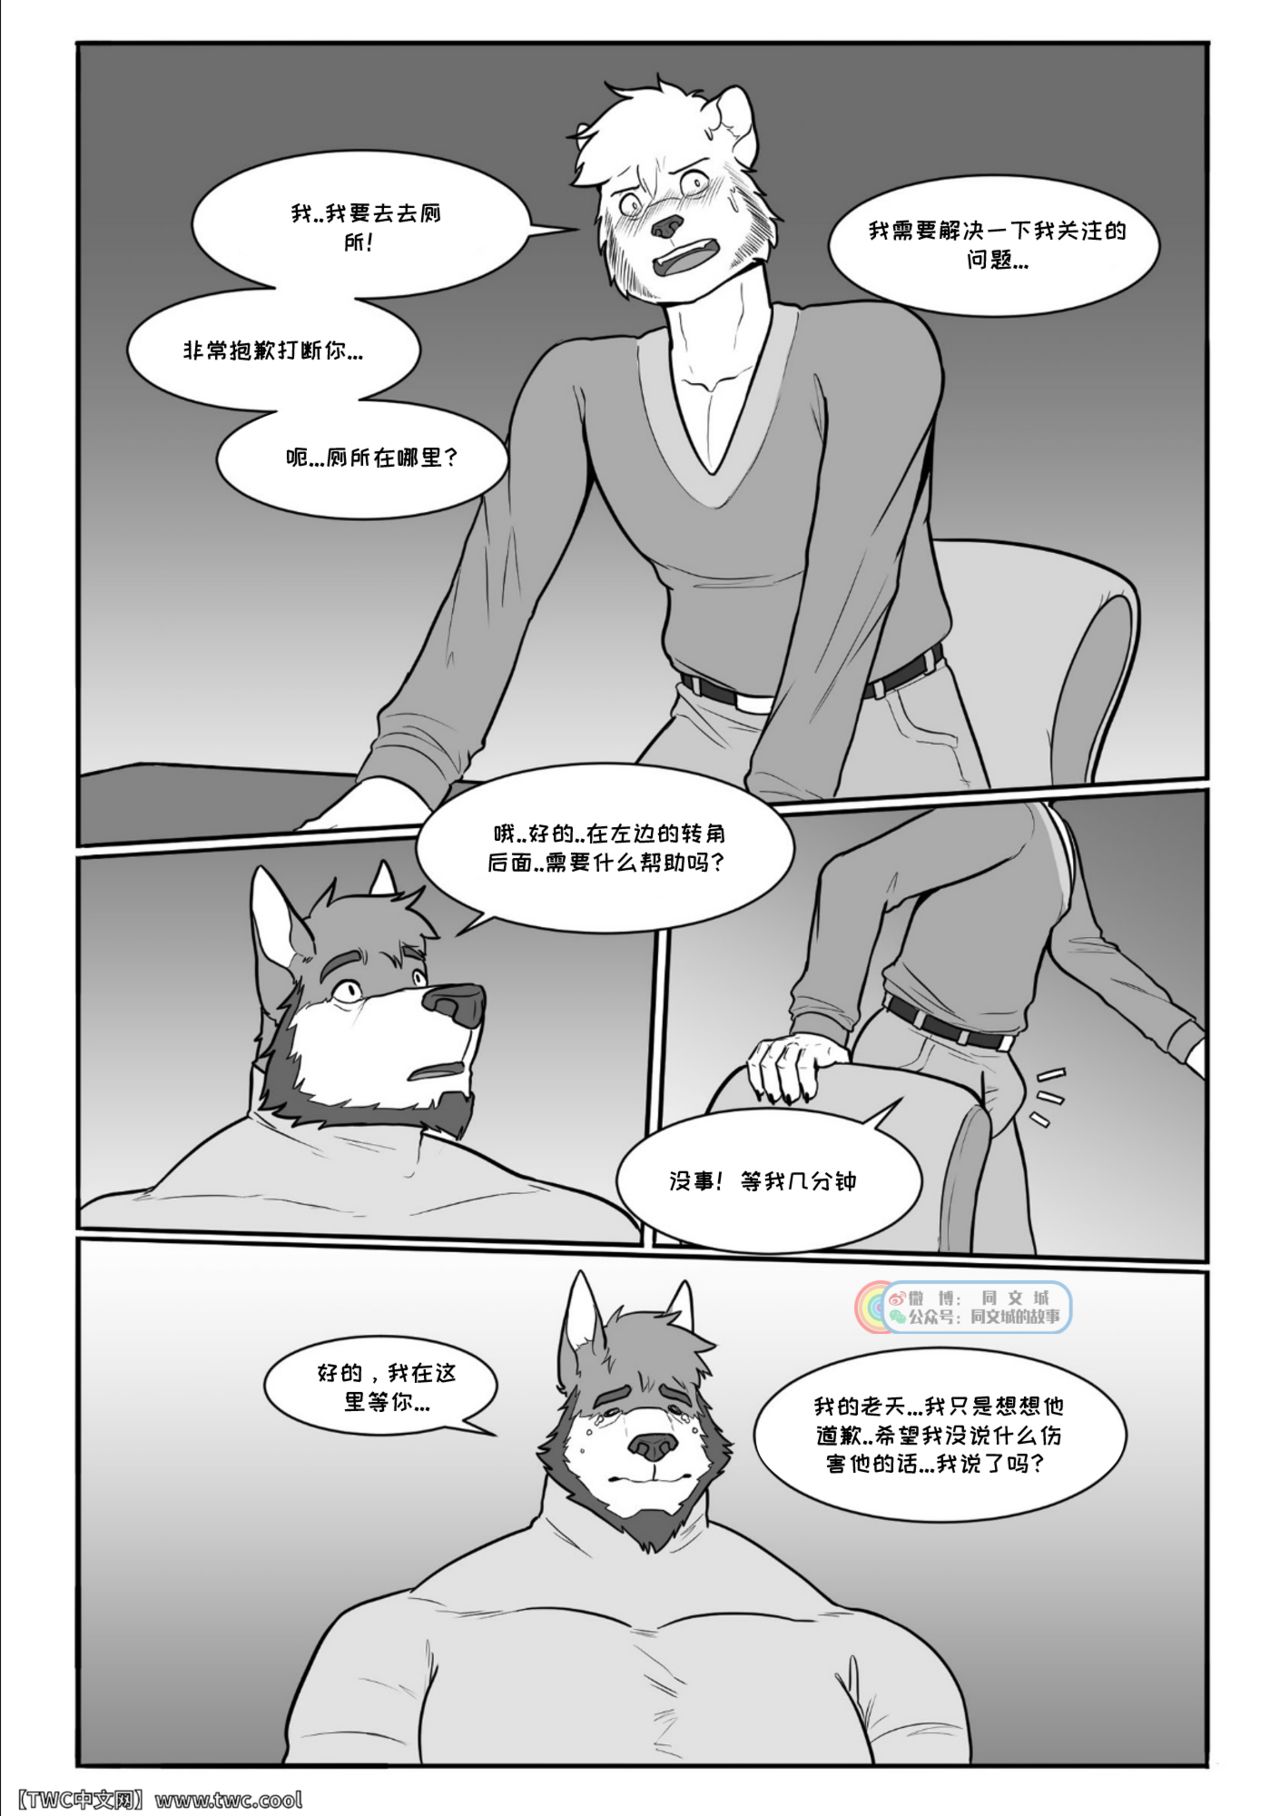 [PurpleDragonRei] Our Differences Ch.2 [Chinese] [中国翻訳] [同文城] [PurpleDragonRei] Our Differences Ch.2 [Chinese] [中国翻訳] [同文城]